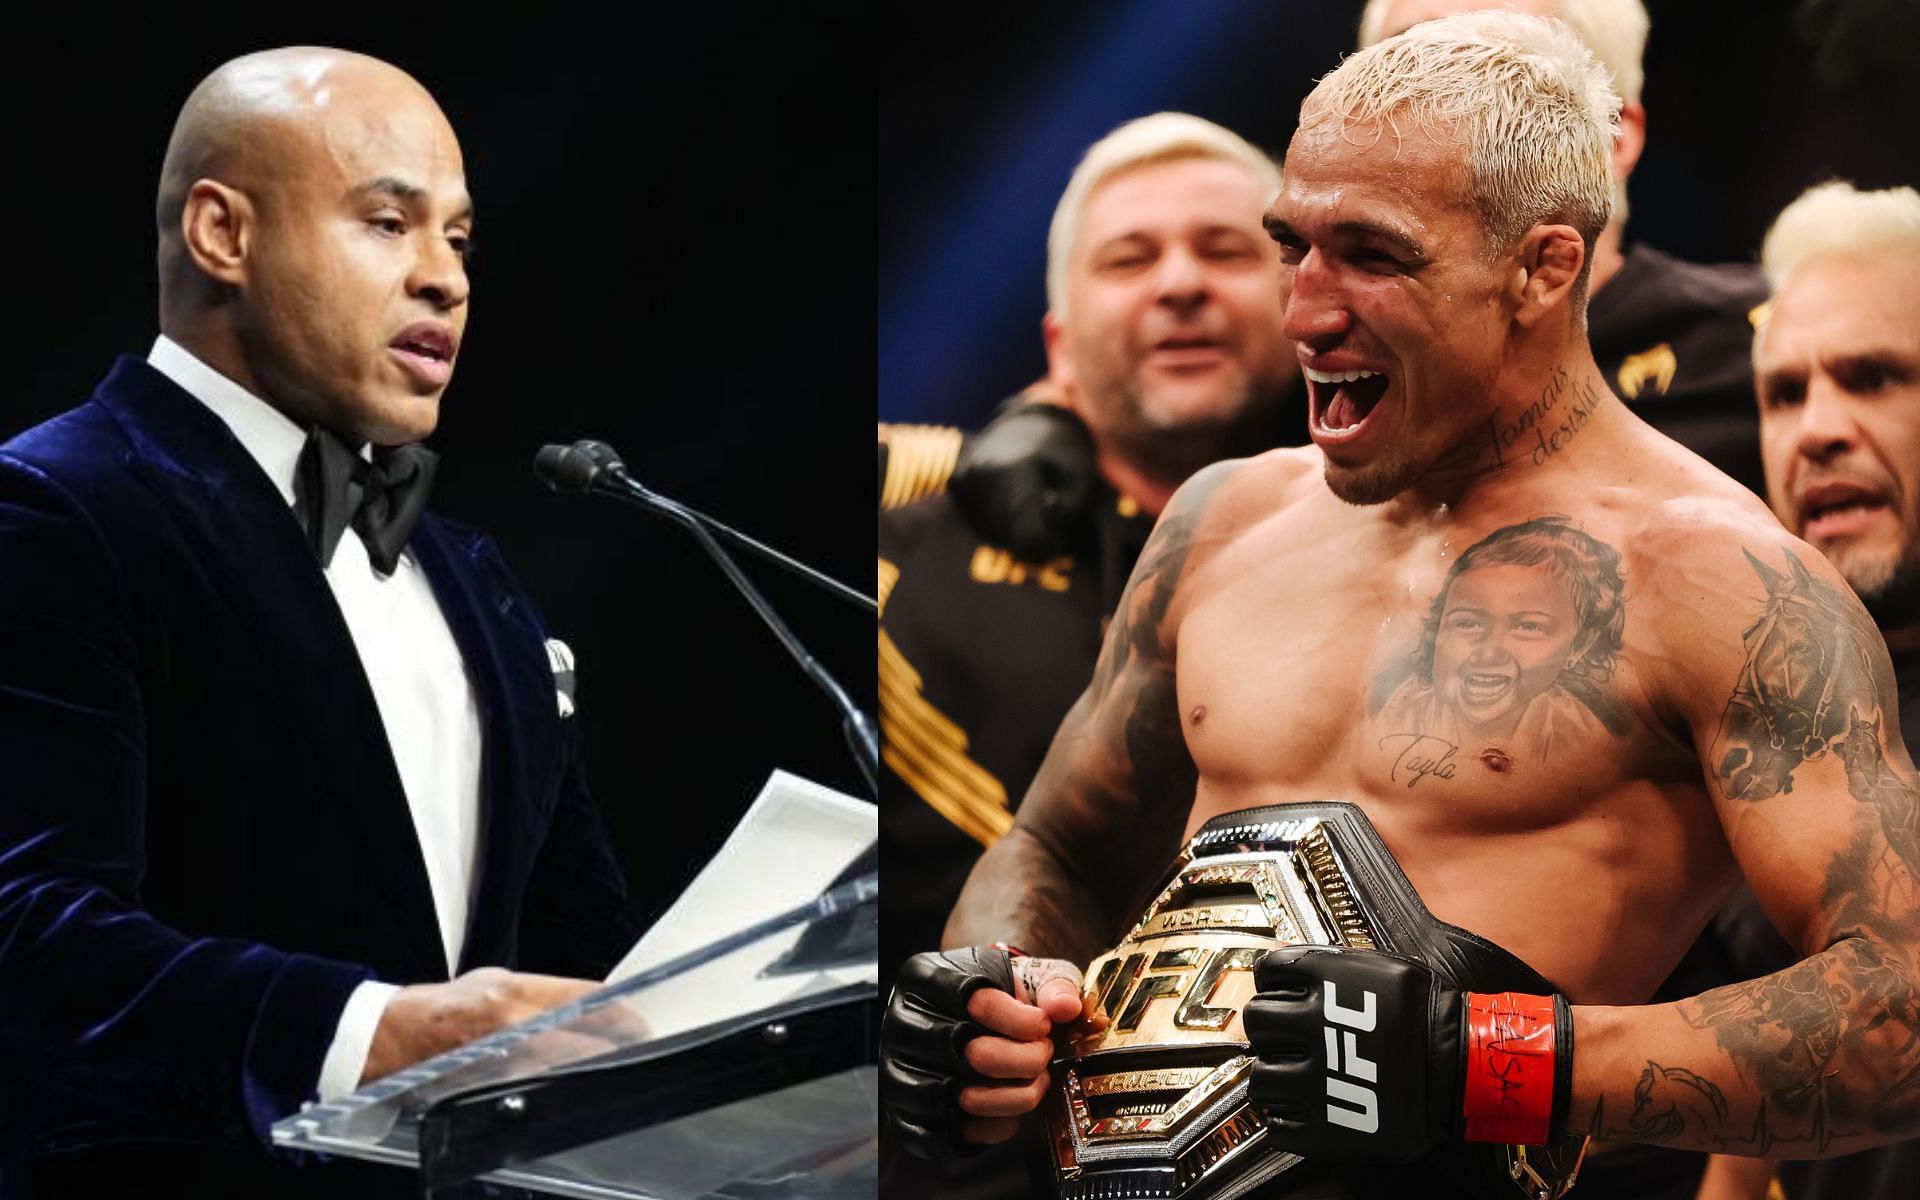 Ali Abdelaziz (left) and Charles Oliveira (right). [Images courtesy: left image from sherdog.com, and right image via Getty Images]